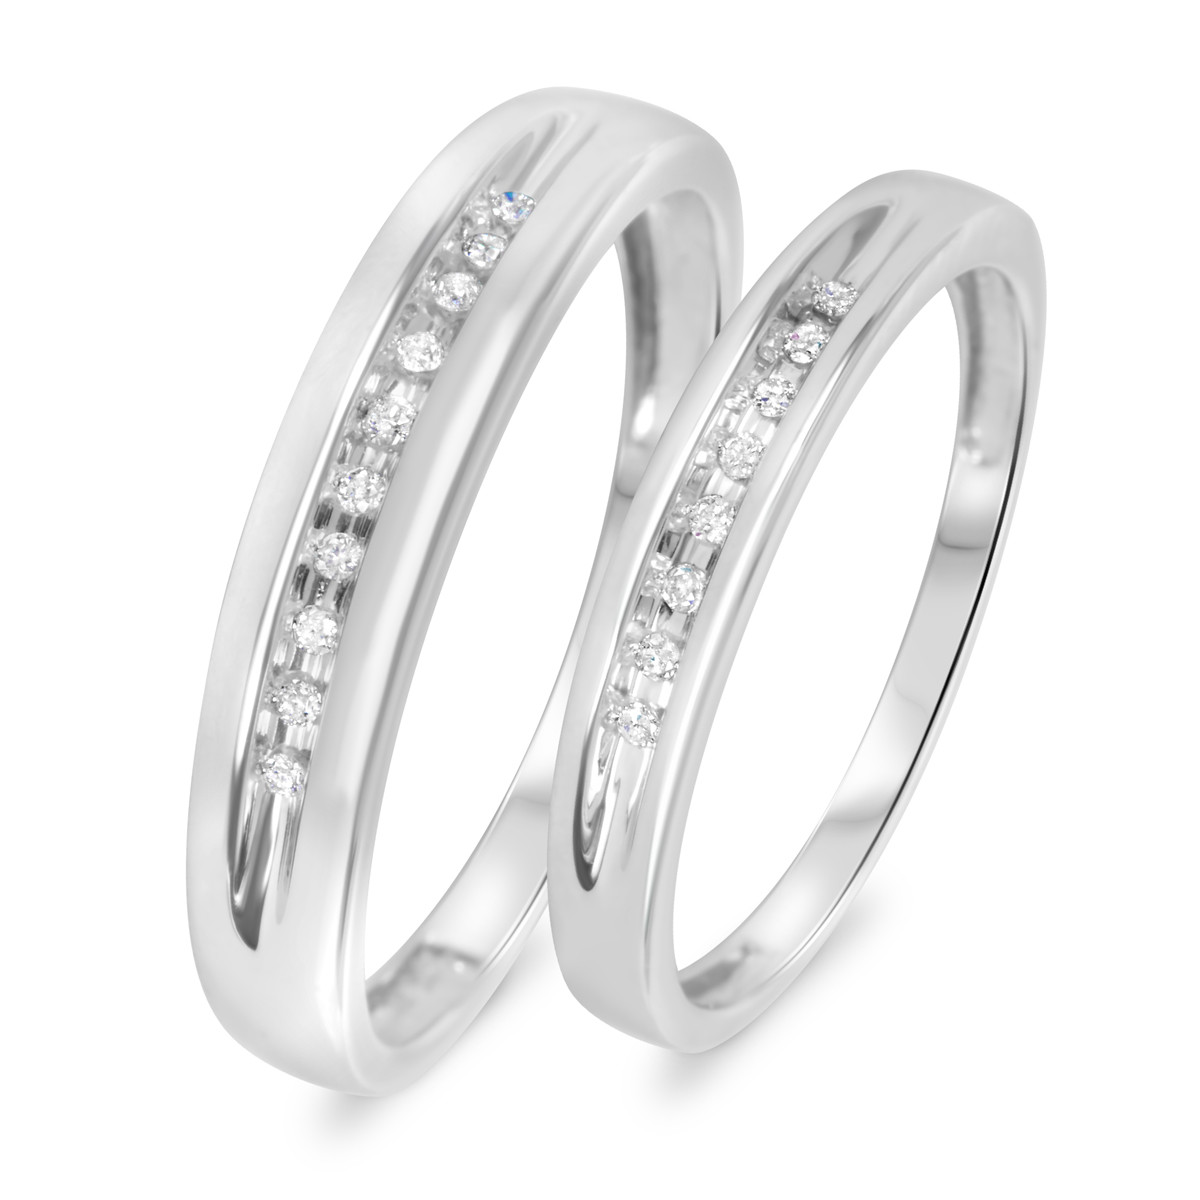 White Gold Wedding Ring Sets His And Hers
 1 10 Carat T W Diamond His And Hers Wedding Rings 10K